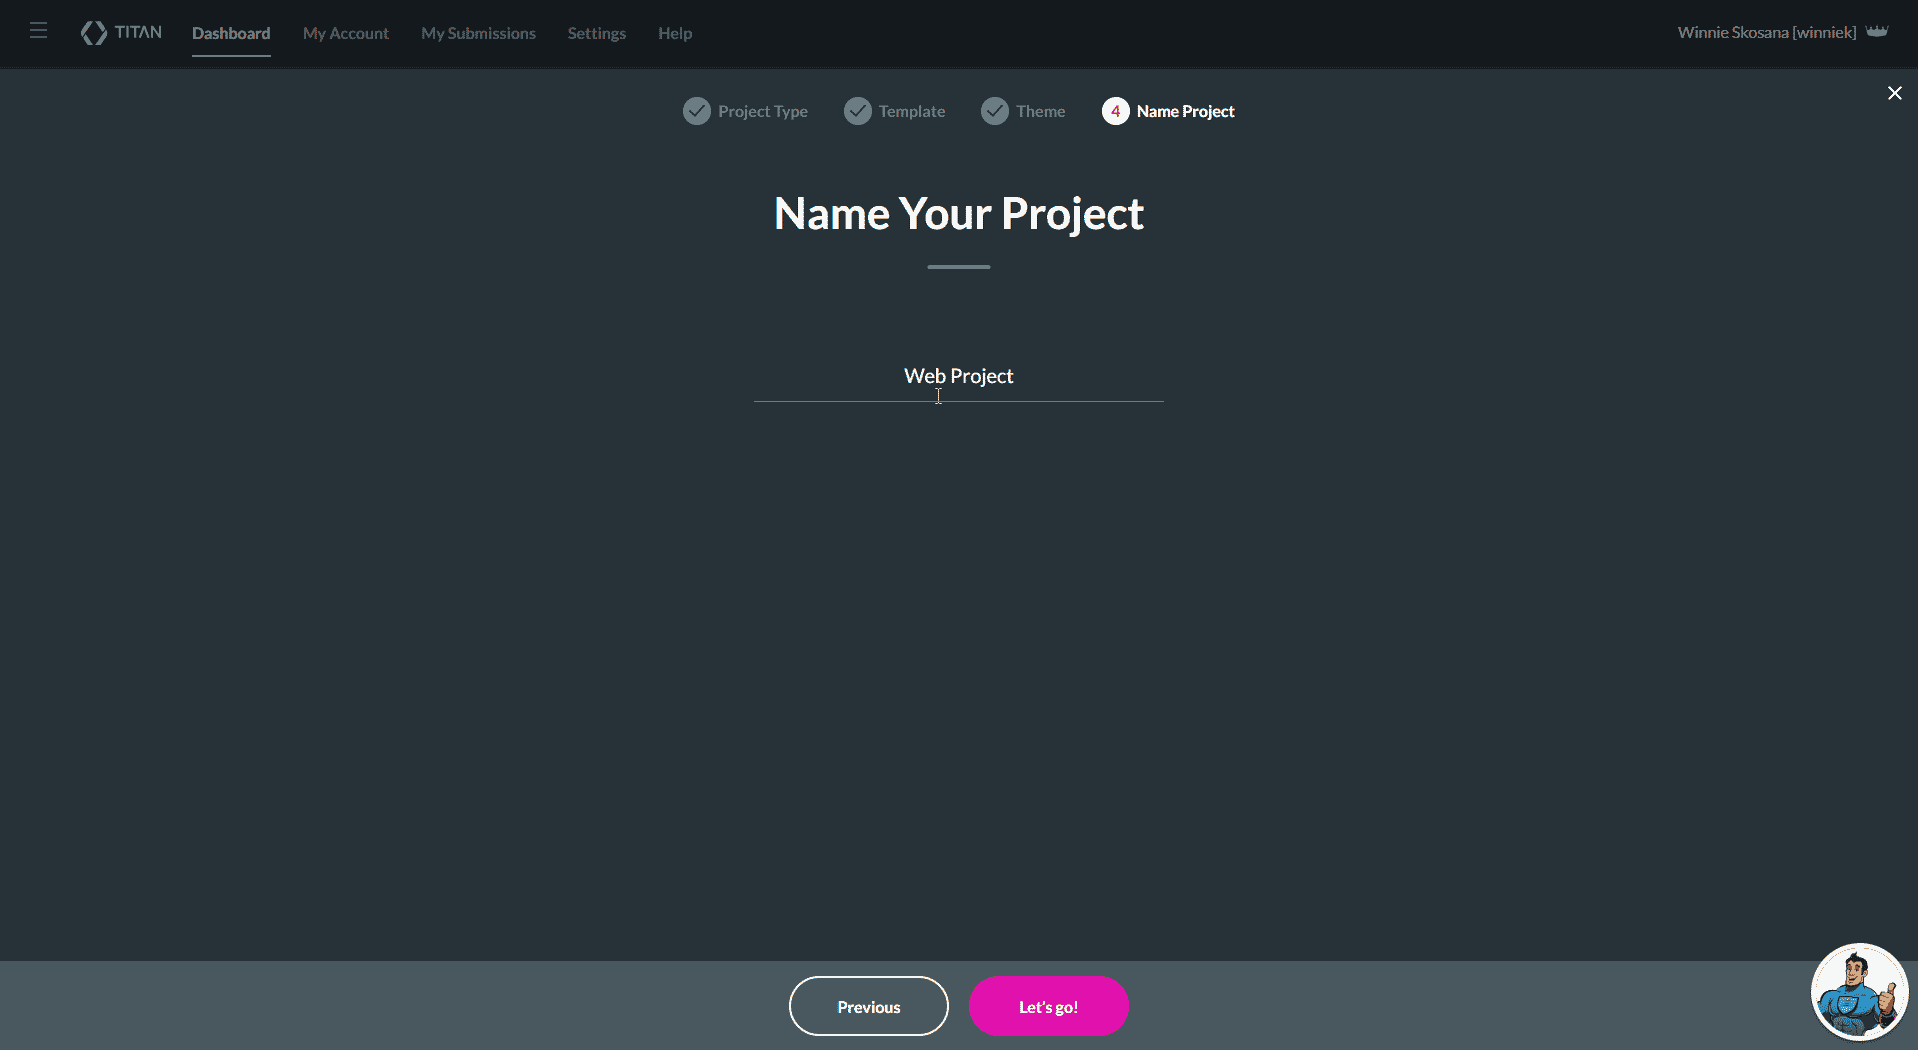 Name Your Project screen